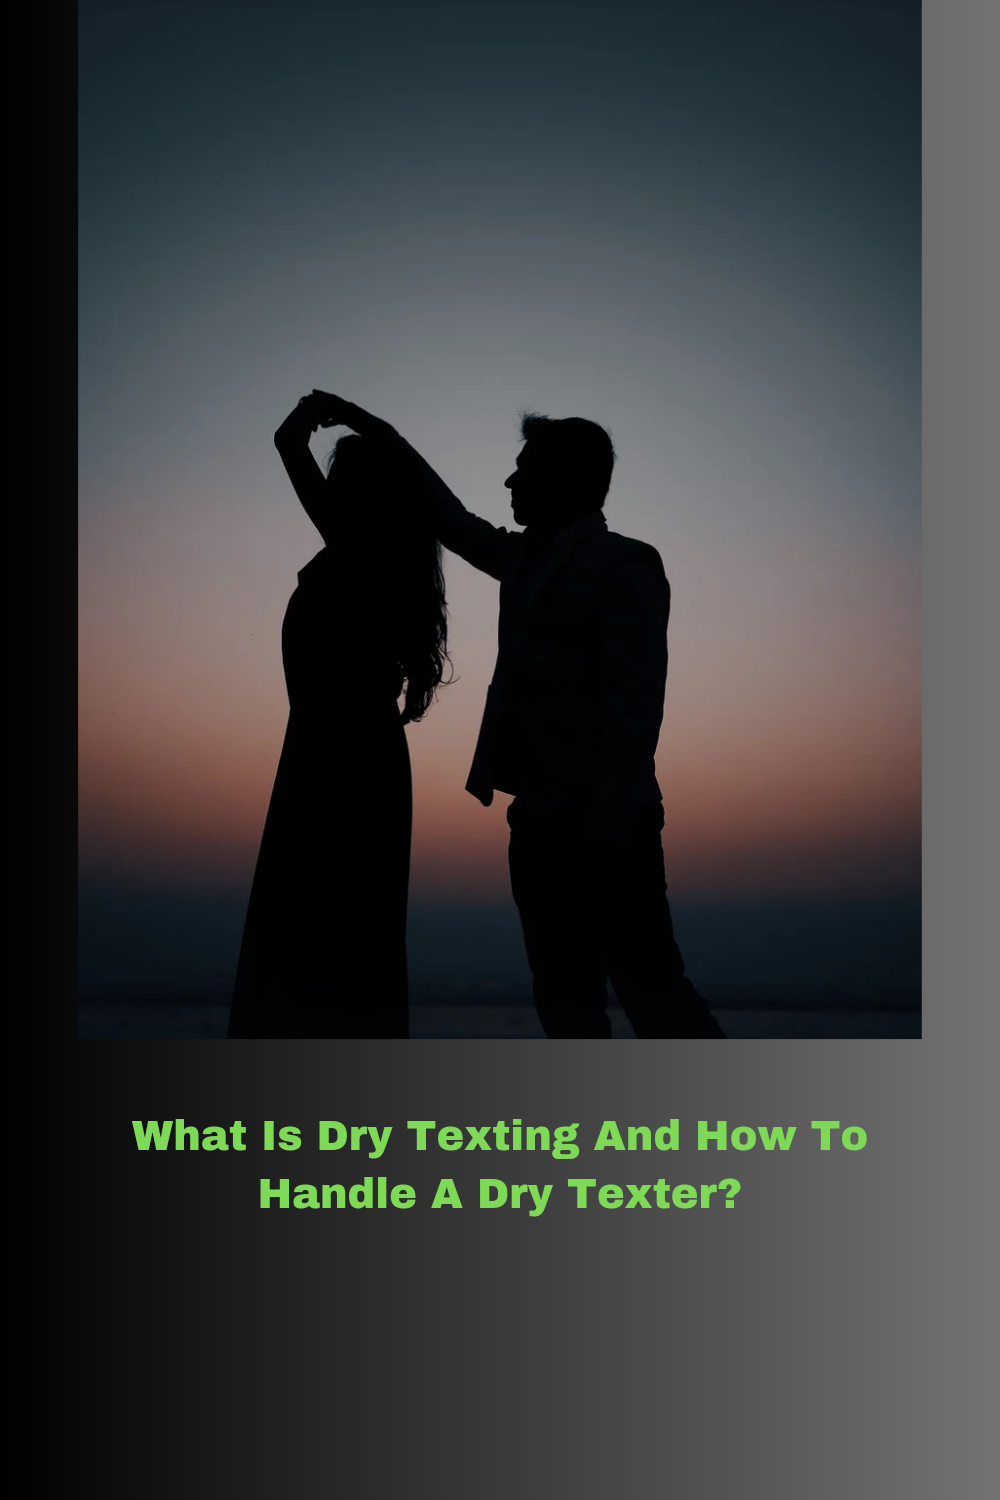 What Is Dry Texting And How To Handle A Dry Texter?